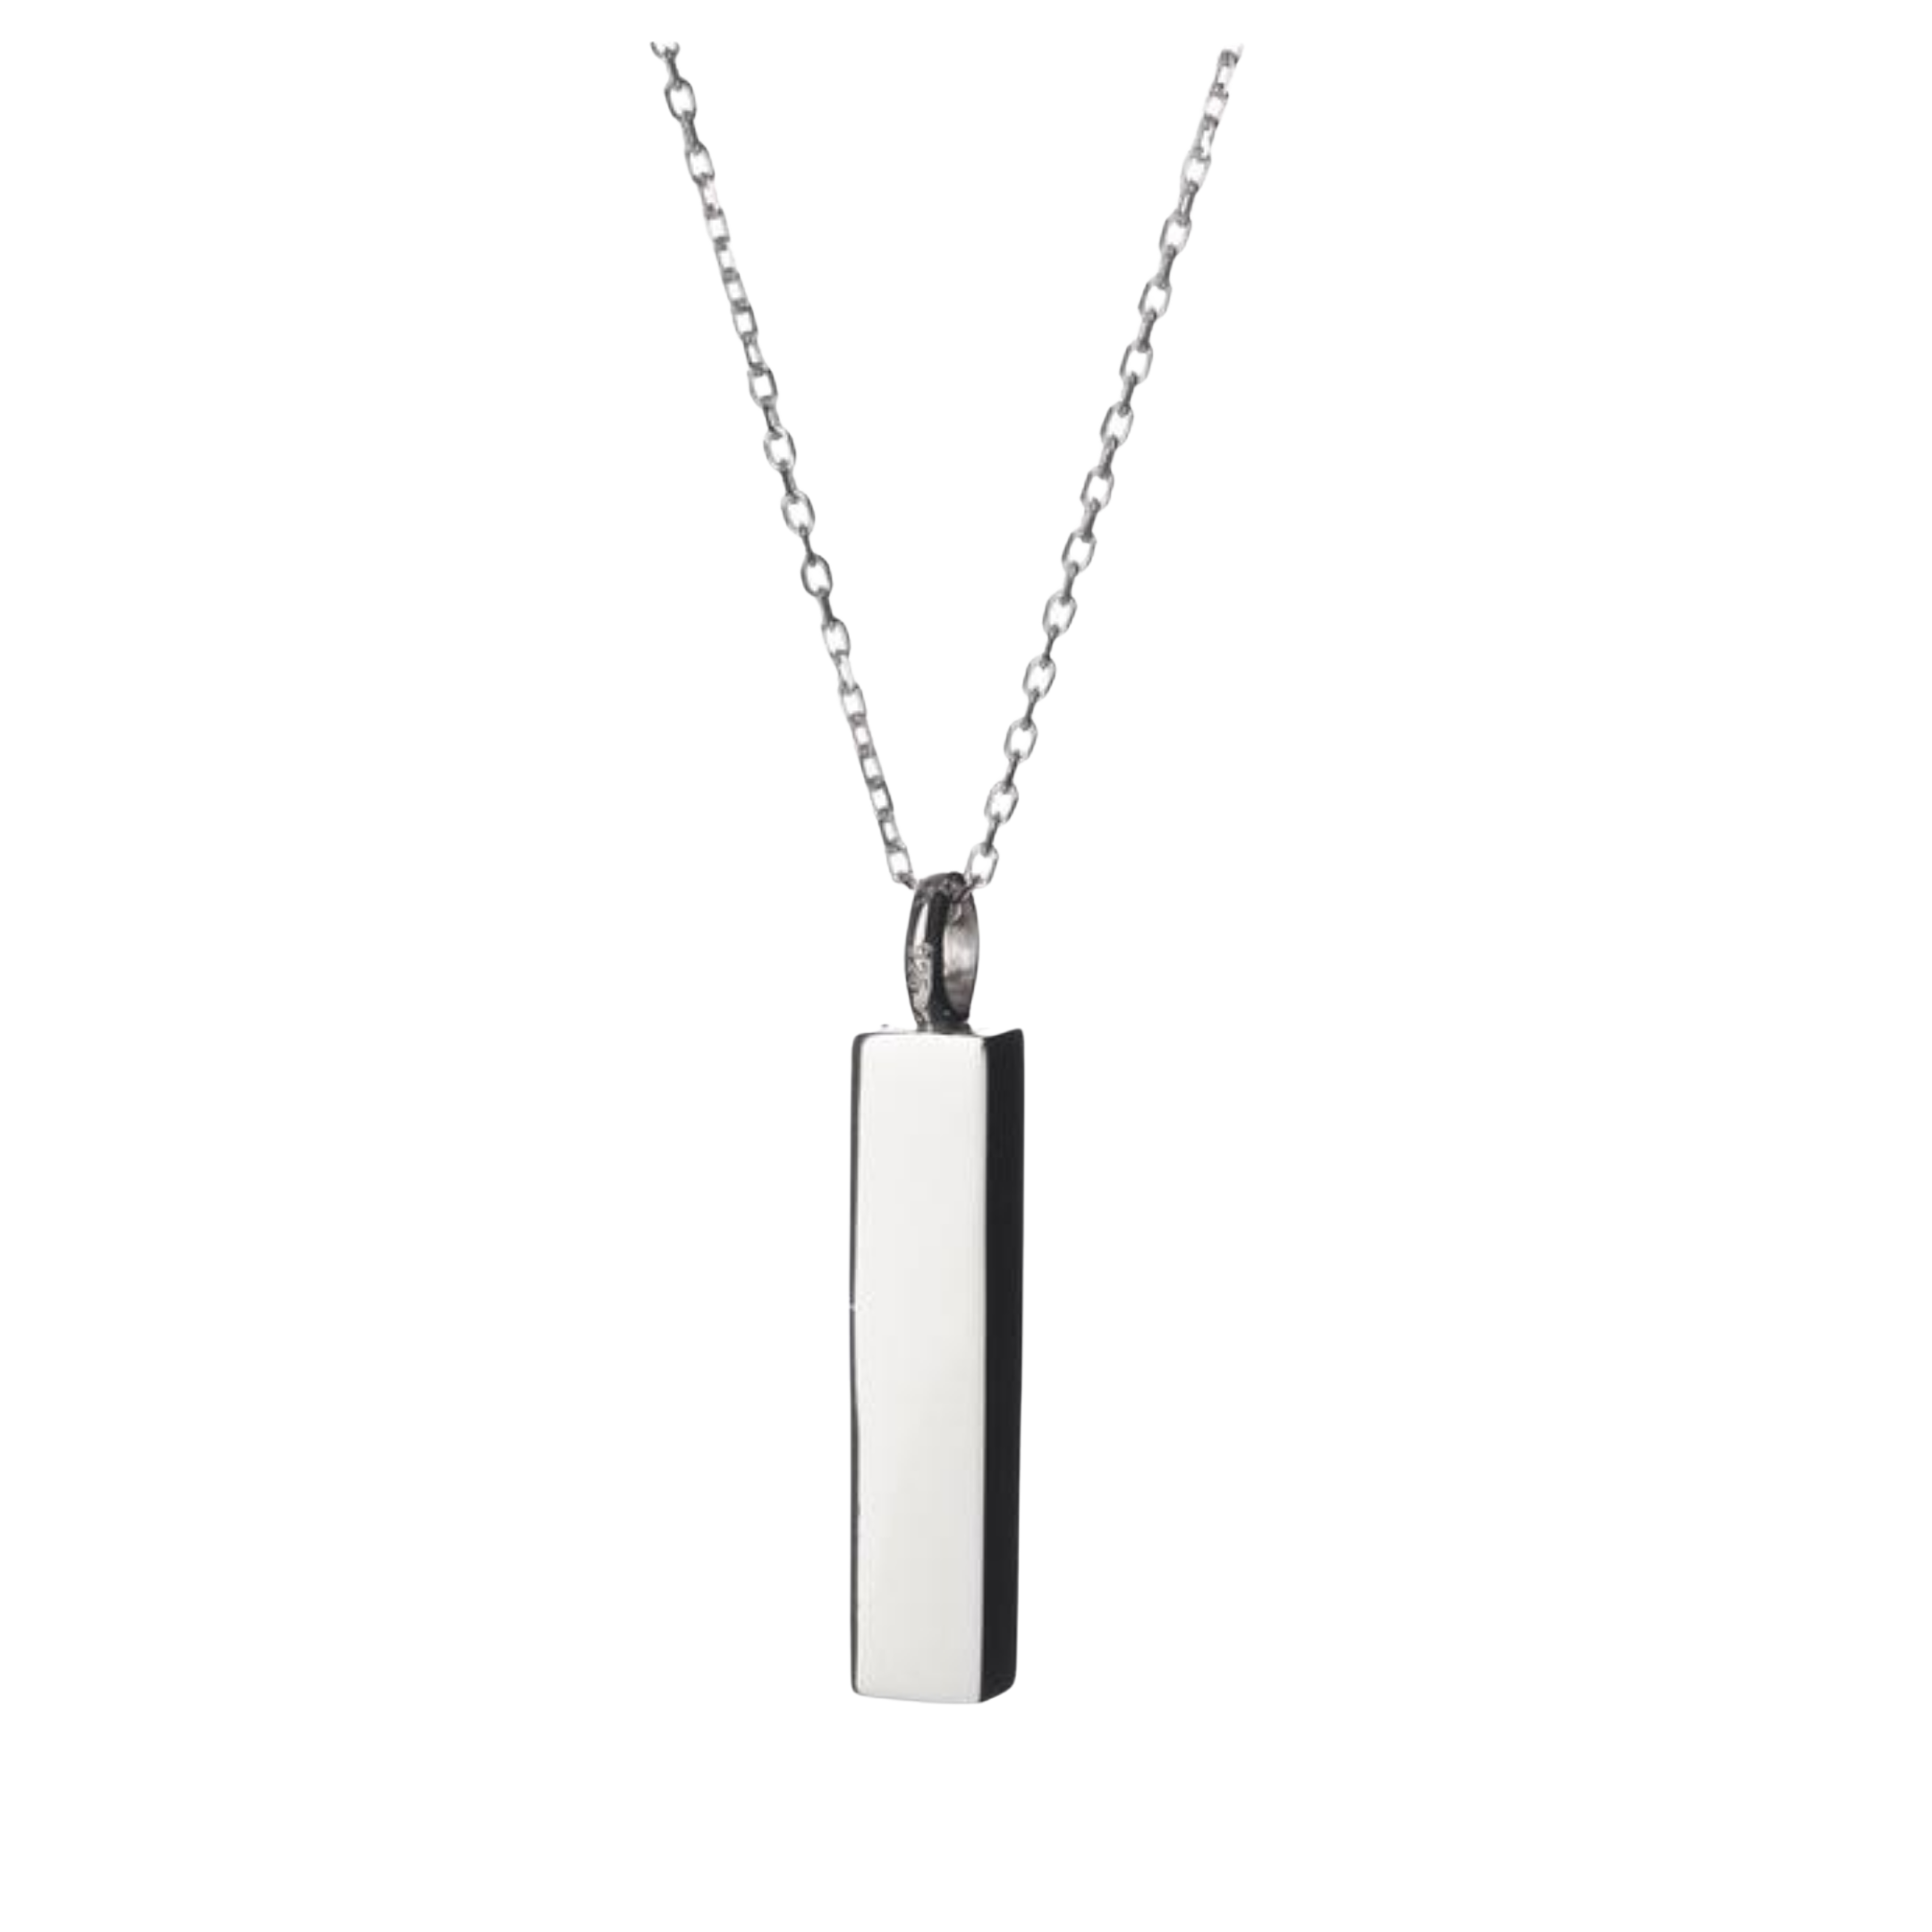 The Pillar Cremation Necklace